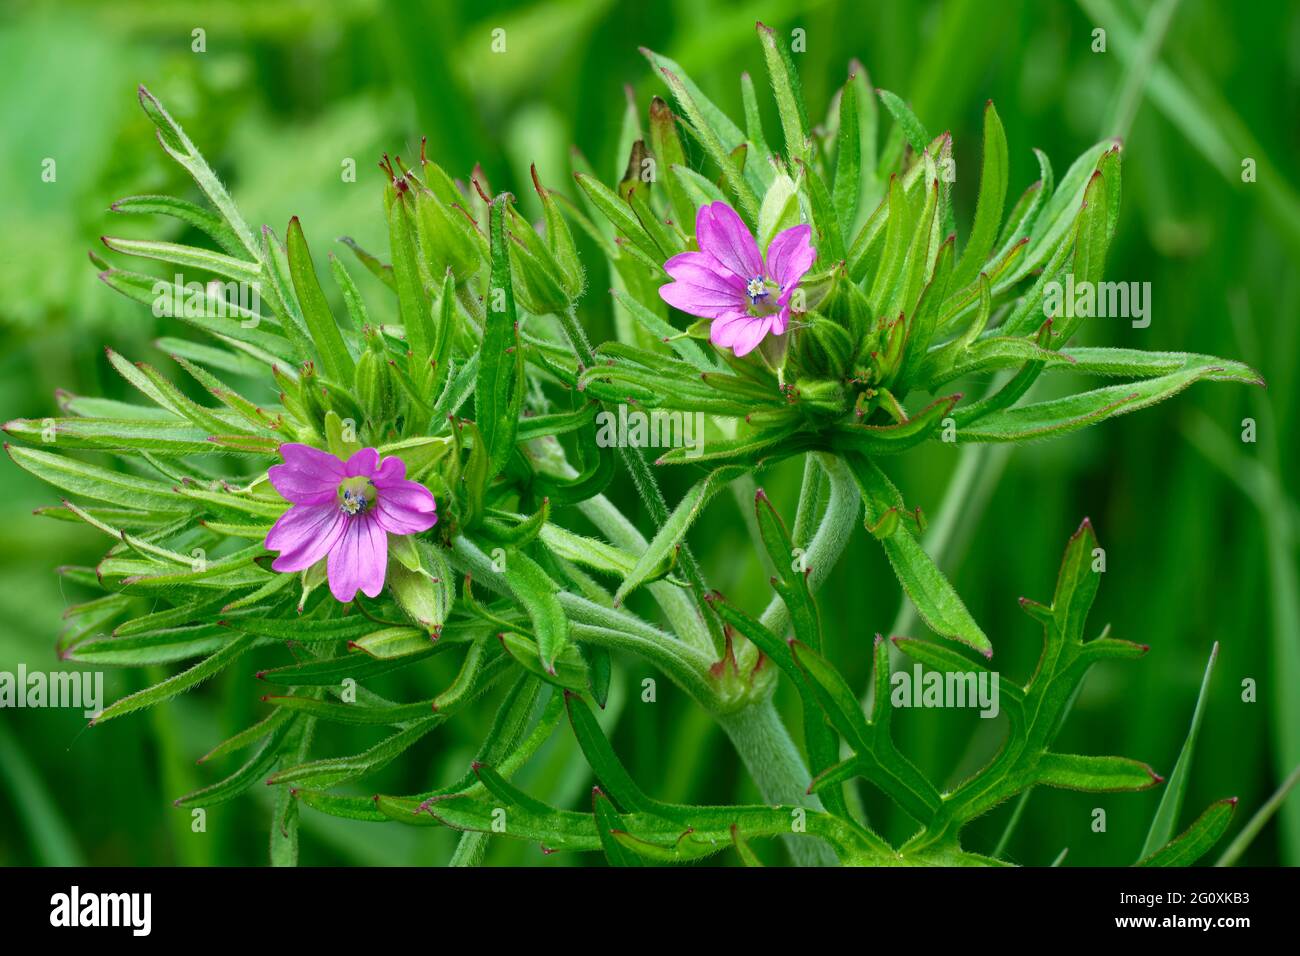 Cut-leaved Crane's-bill - Geranium dissectum, two flowers, buds & Leaves Stock Photo